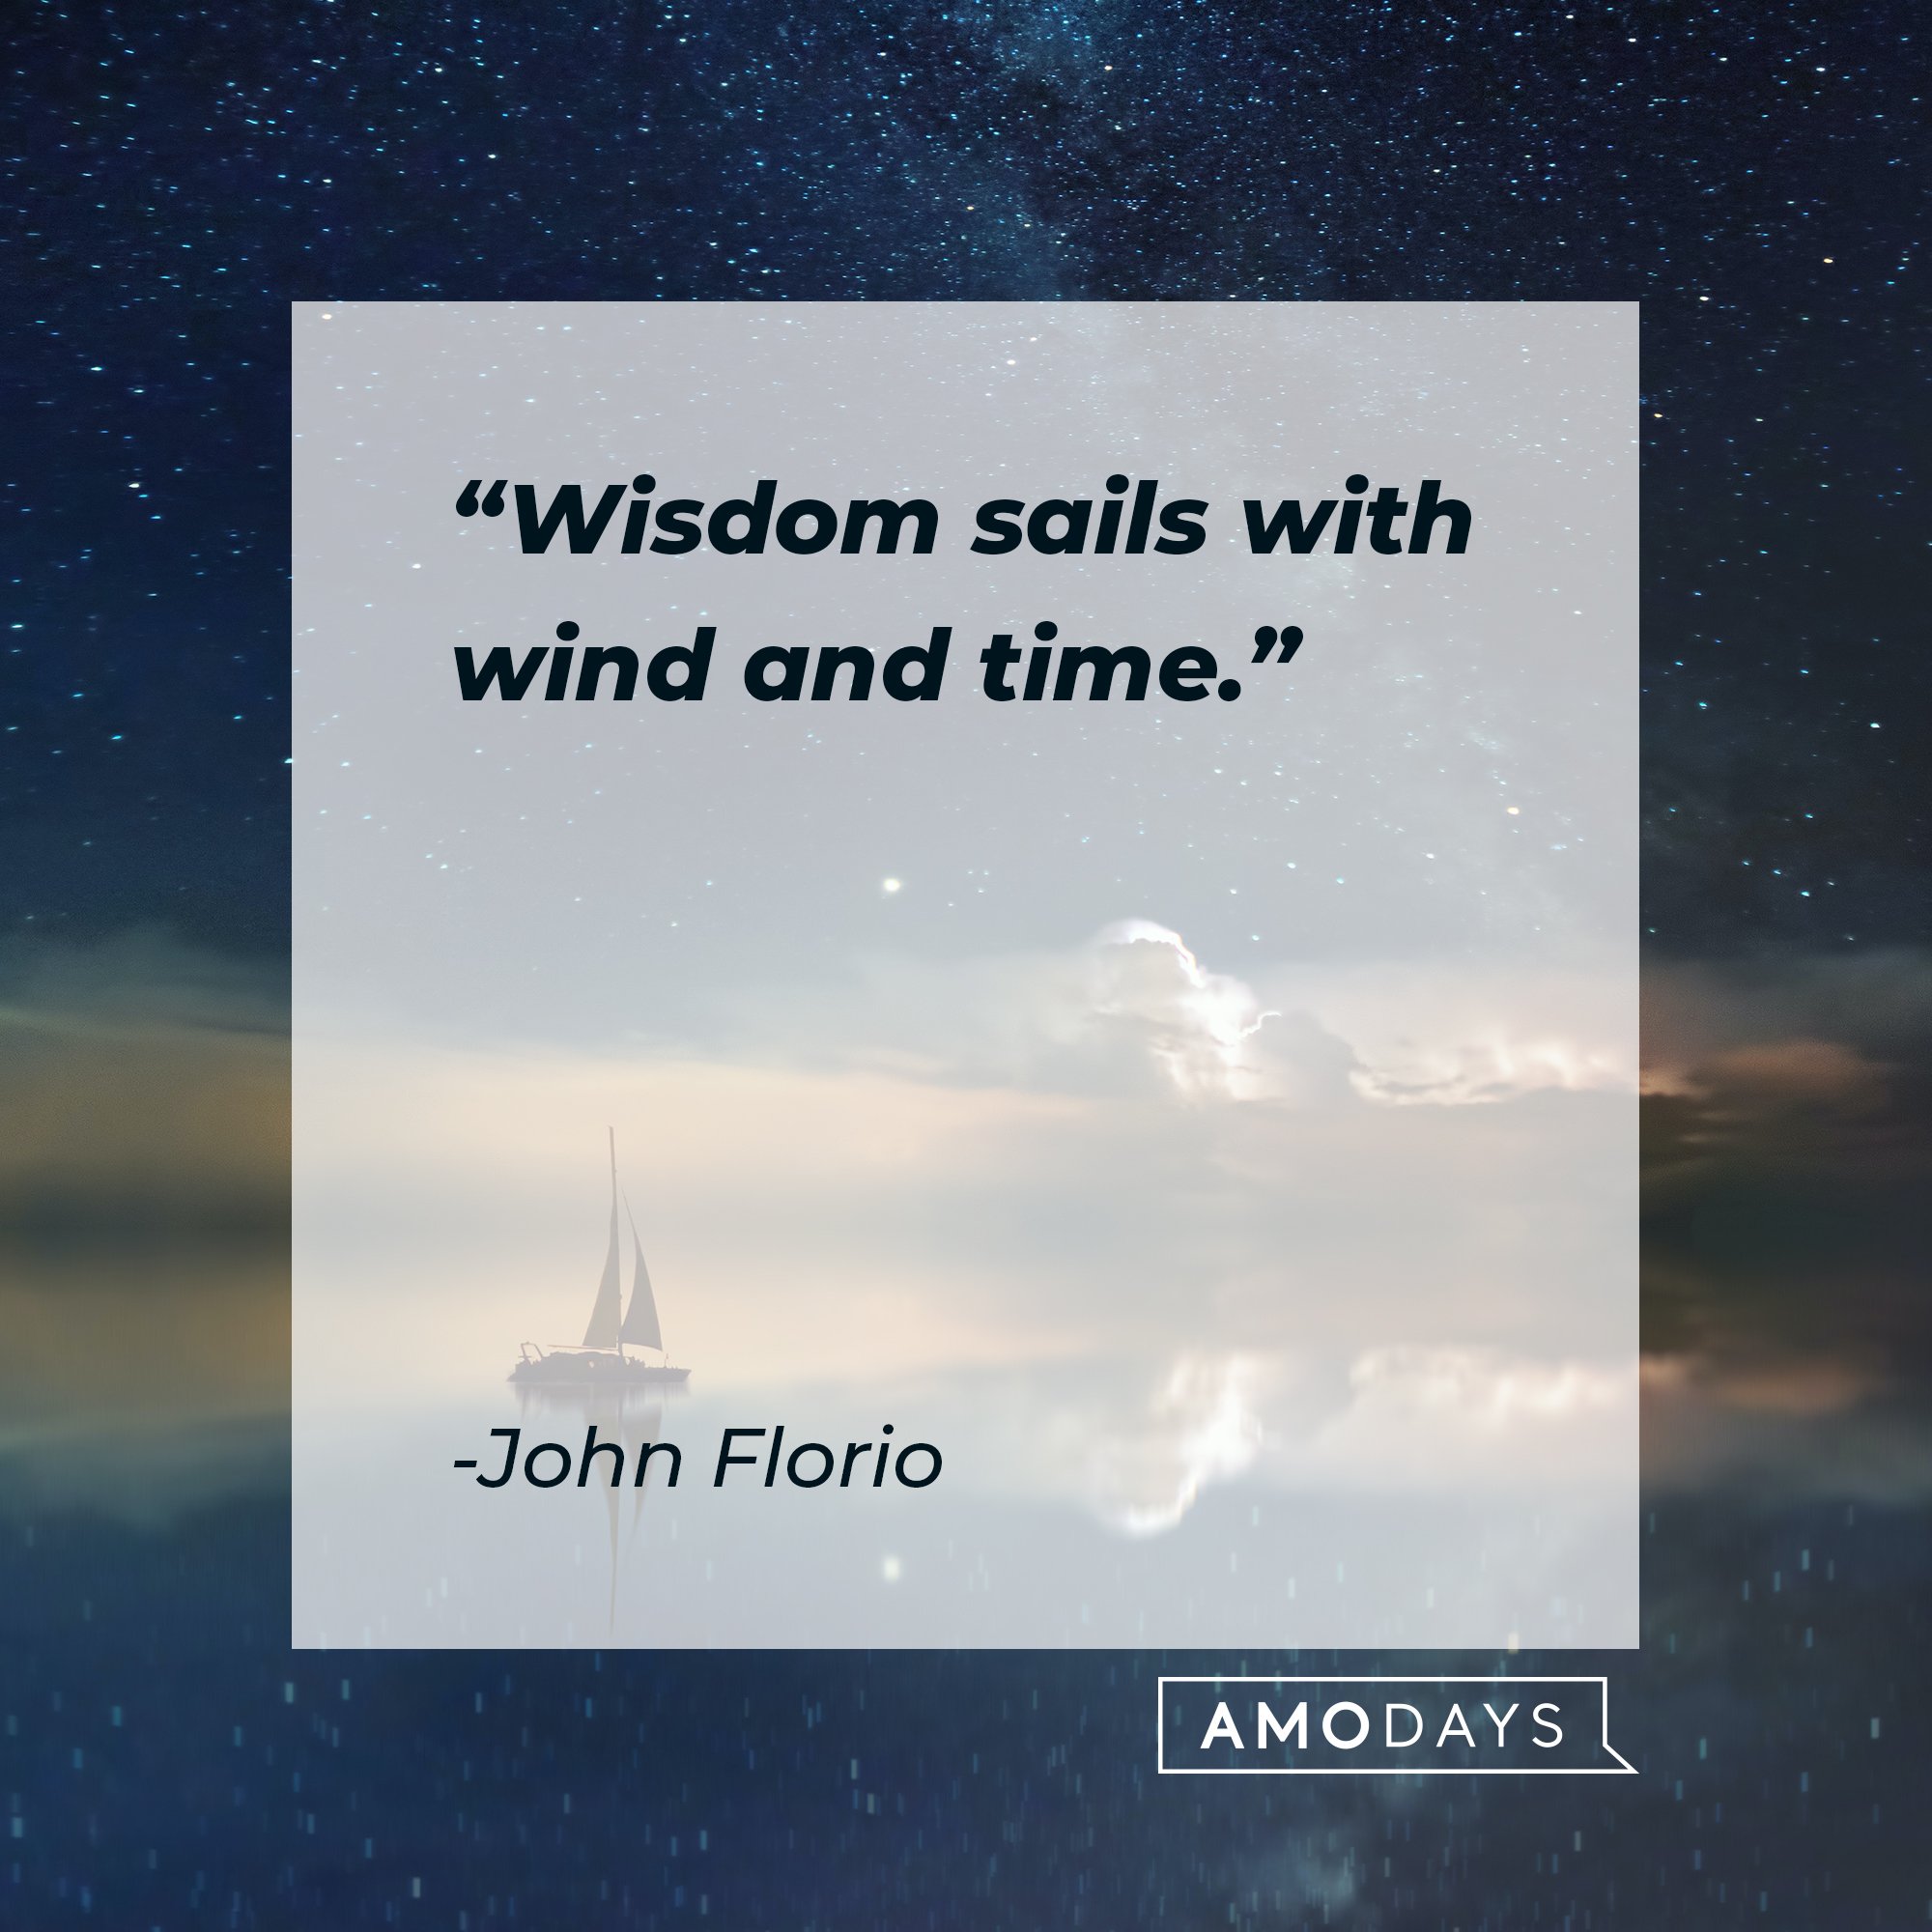 John Florio's quote: "Wisdom sails with wind and time." | Image: AmoDays